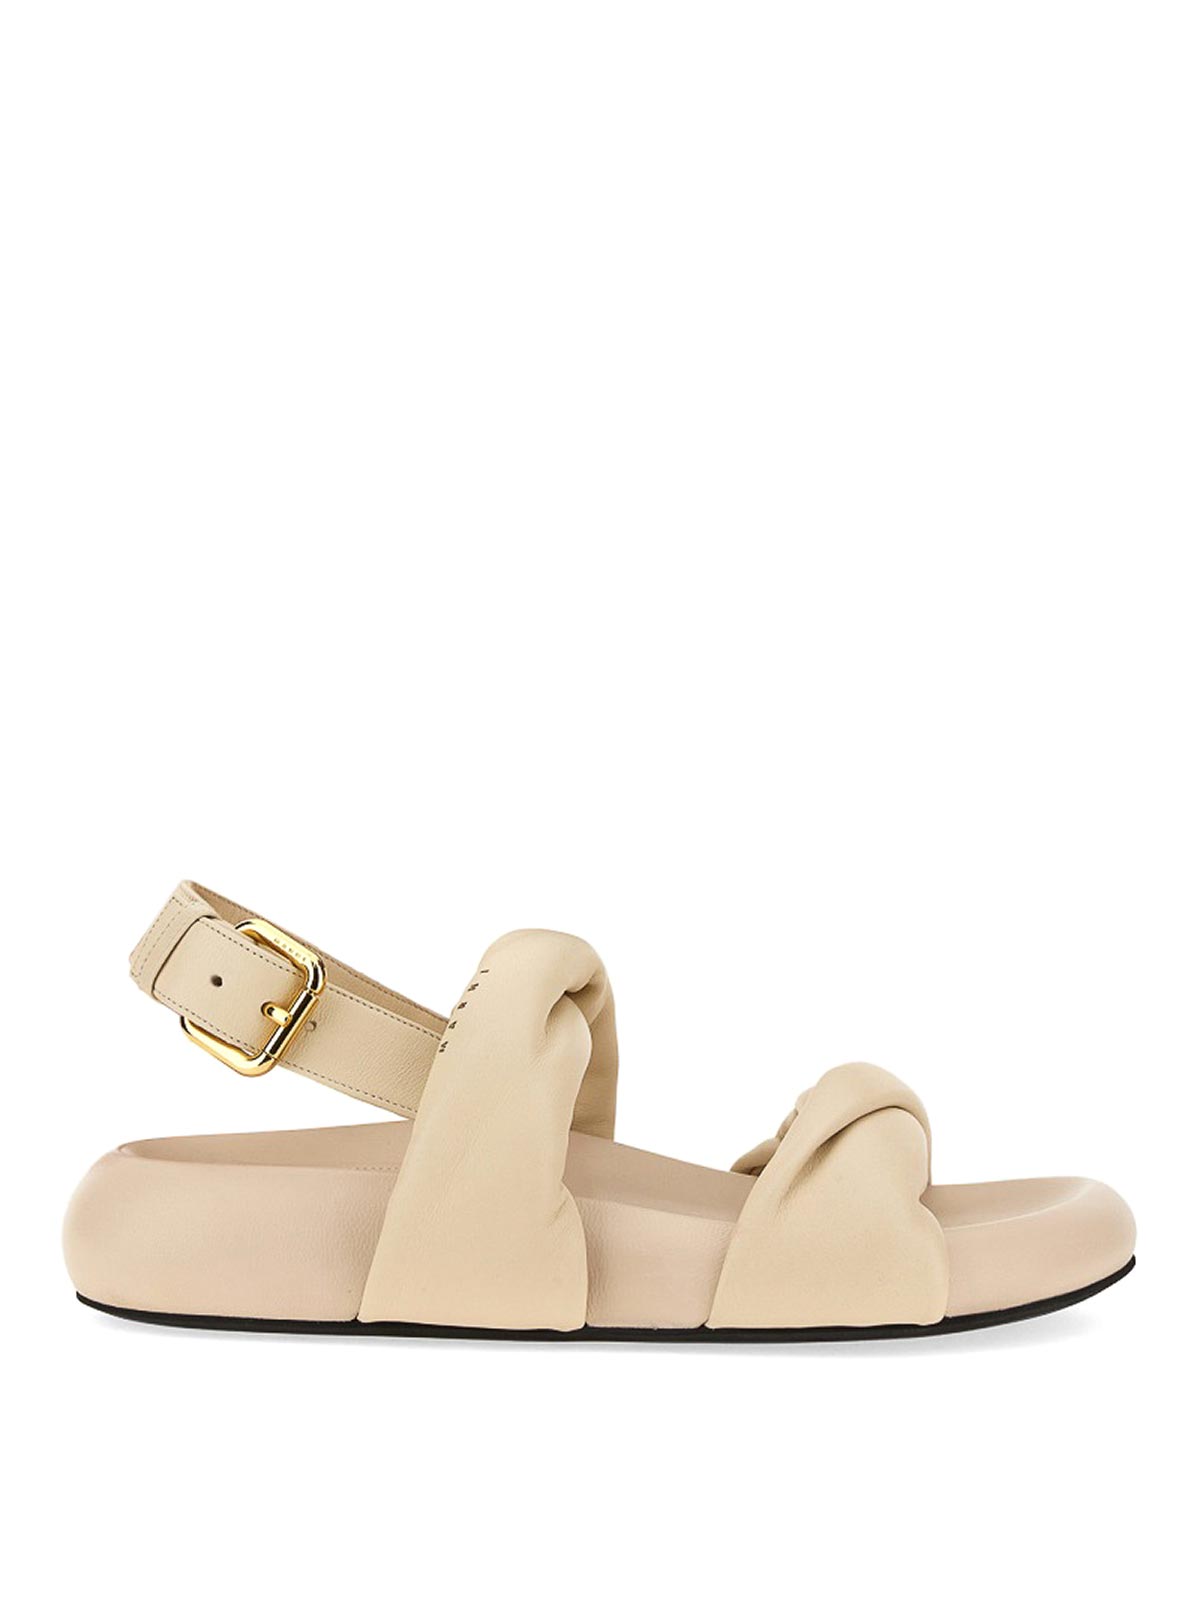 Marni Leather Sandal In Neutral